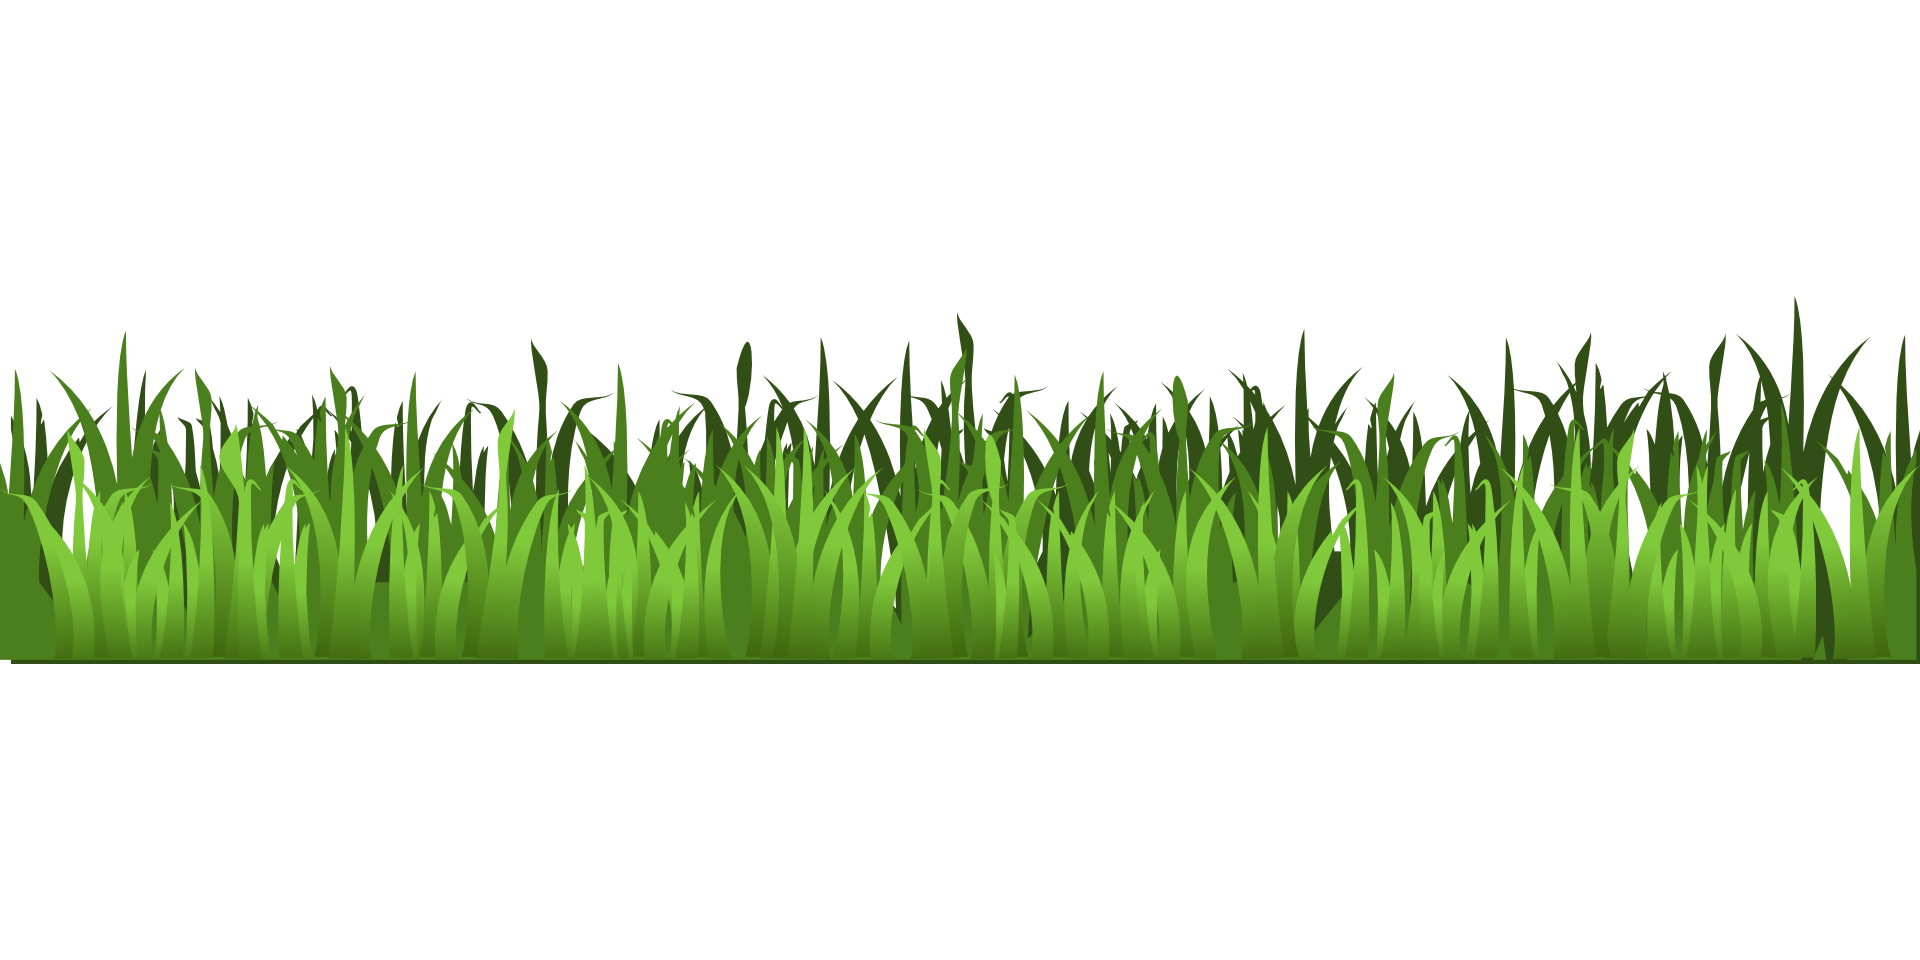 Meadow Clip Art of Green Day � Clipart Free Download 